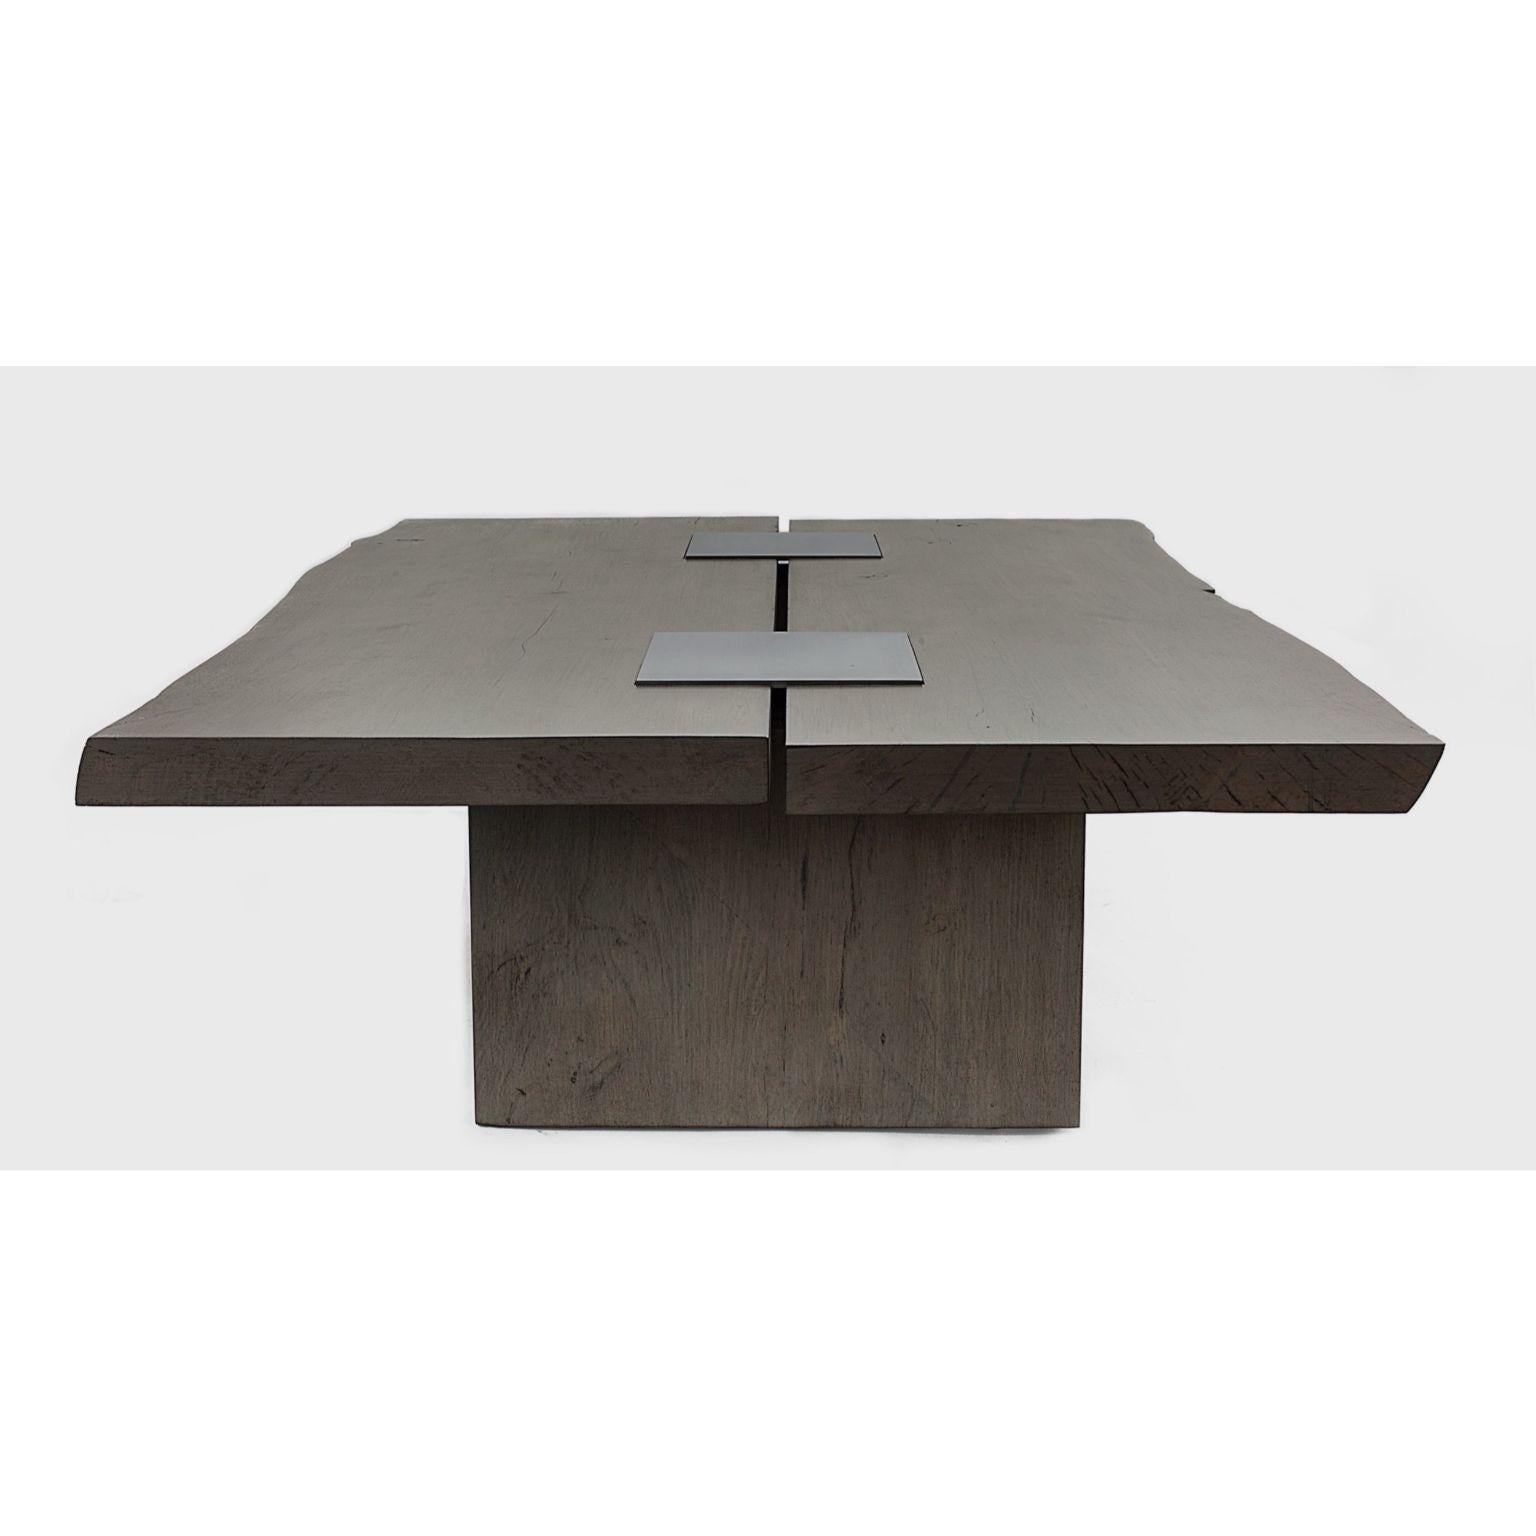 Berliner coffee table by Aguirre Design
Dimensions: L 152.4 X W 96.5 X H 35.6 cm
Materials: Solid maple with grey oxidized finish and brushed stainless steels inserts
 Pedestals in solid maple with grey oxidized finish

Rustic yet refined the